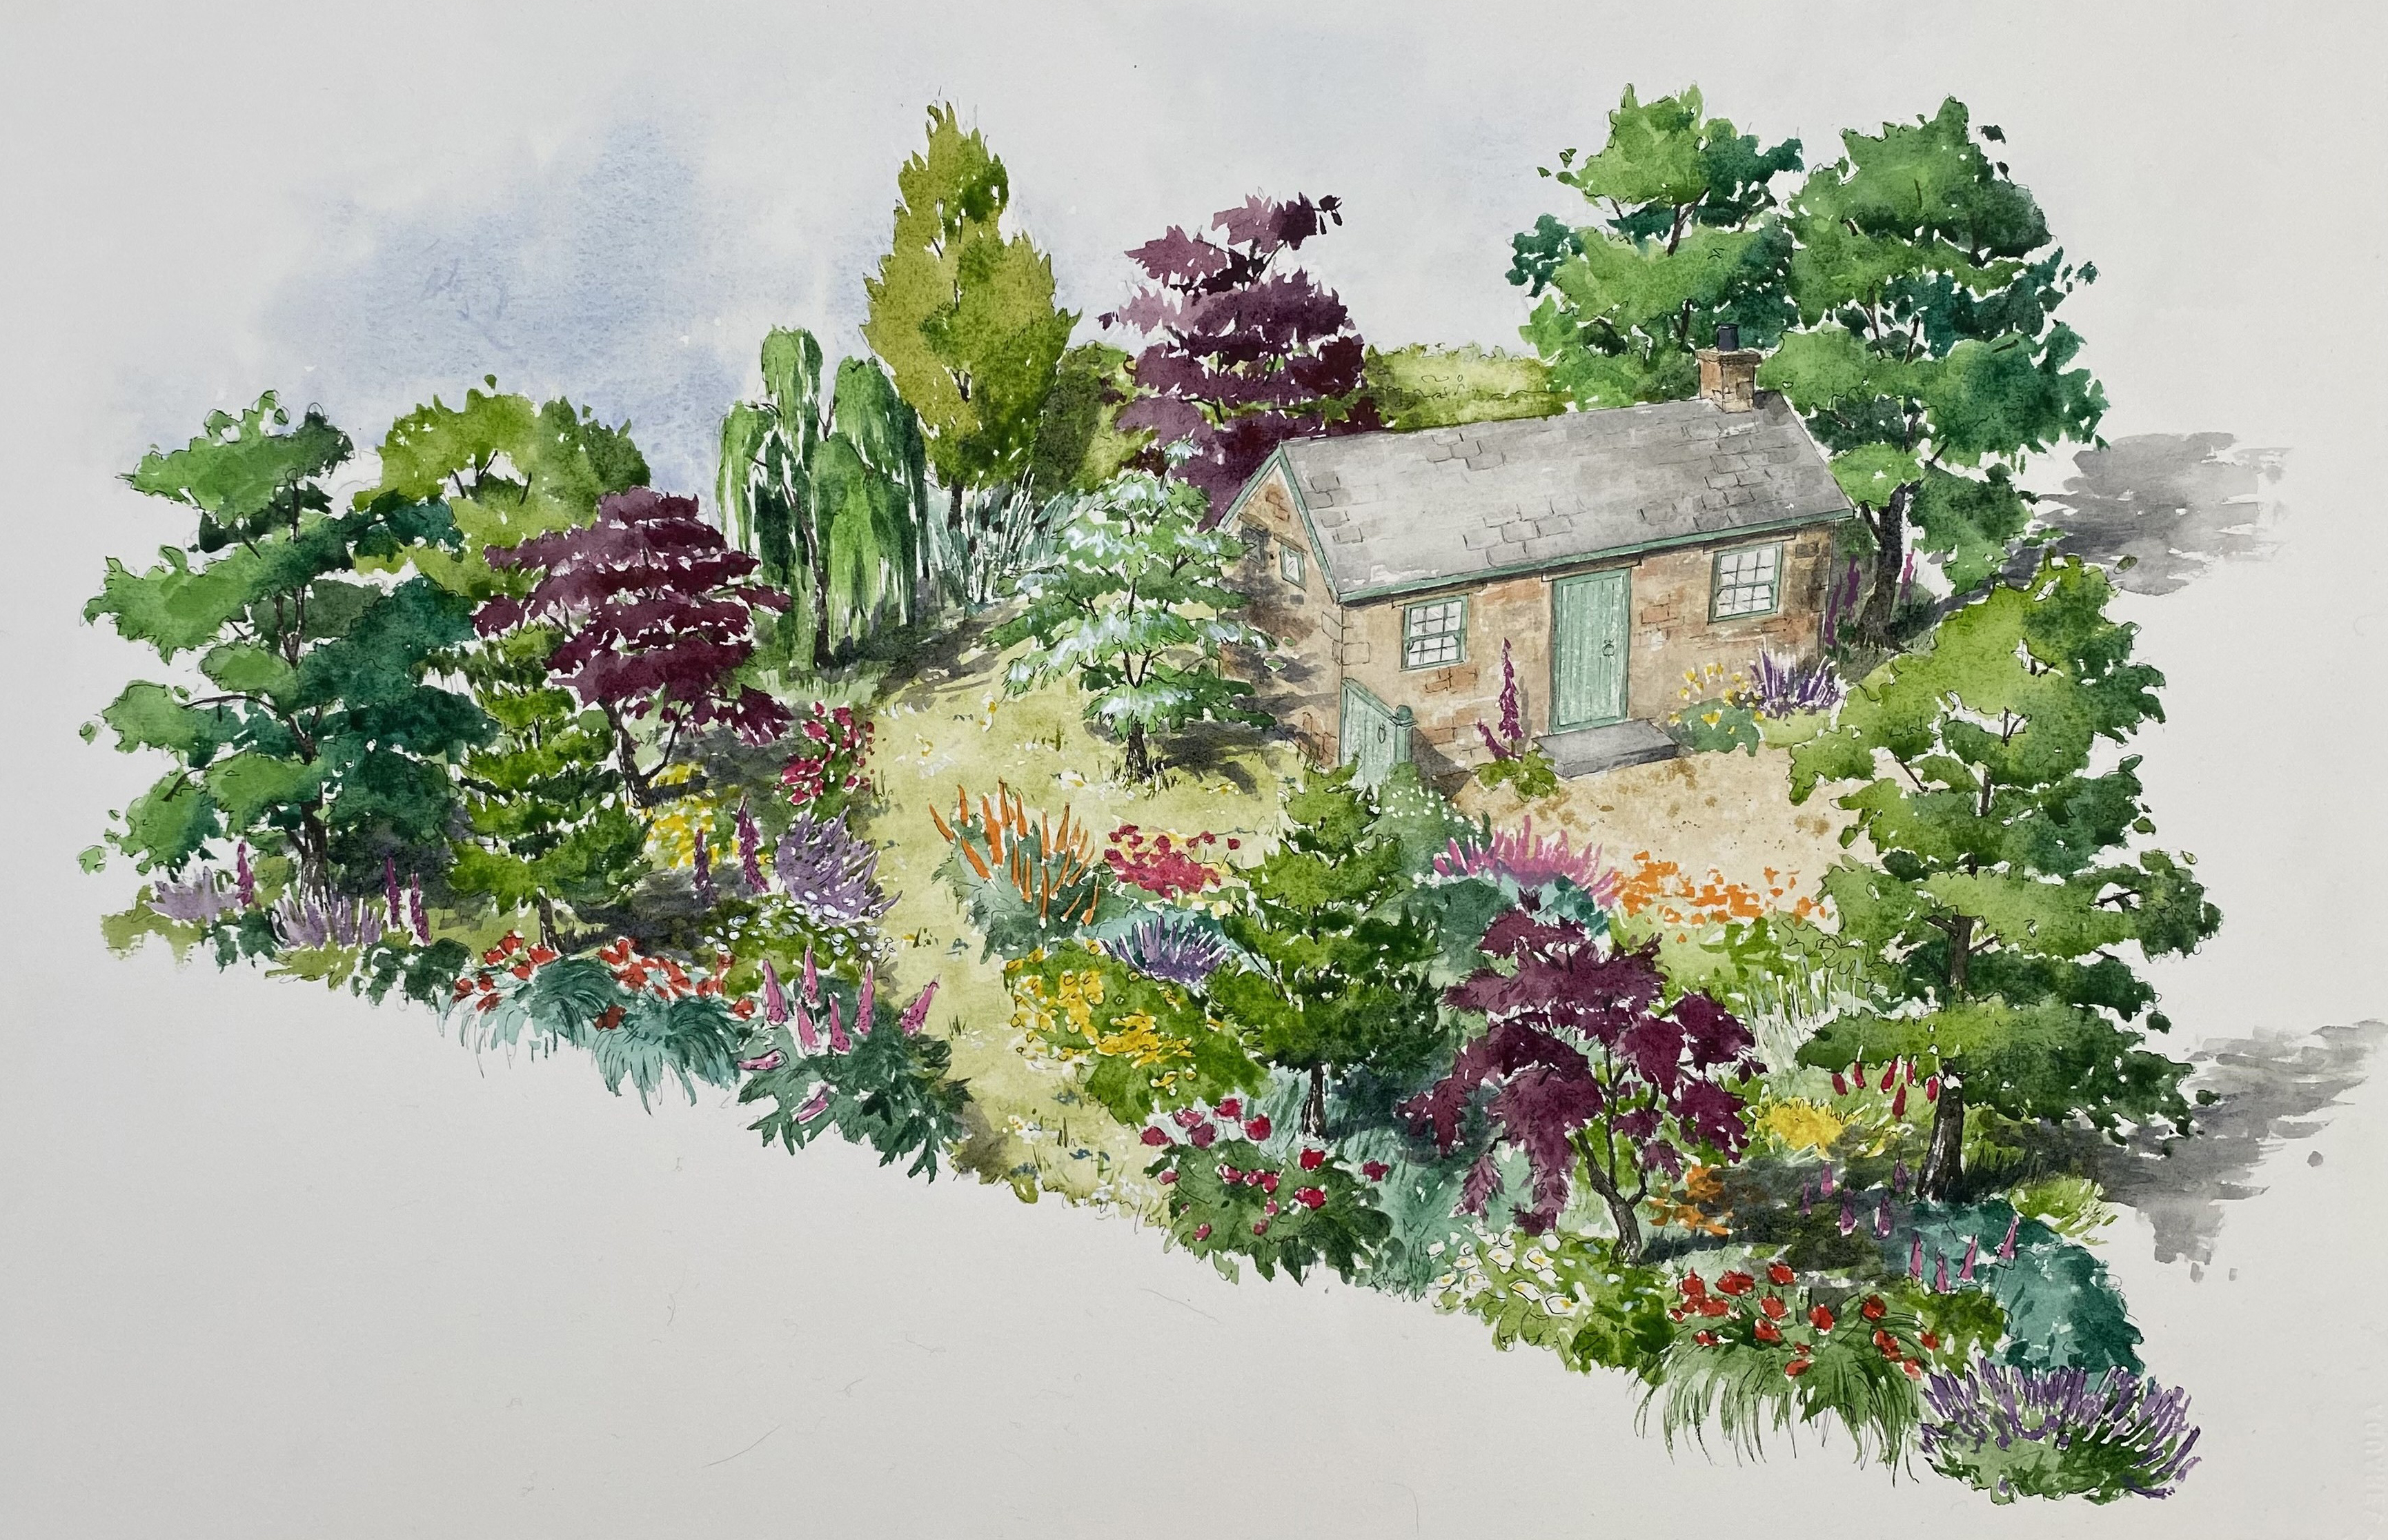 Sketch of A Garden Fit For A King show garden at this year's BBC Gardeners' World Live 